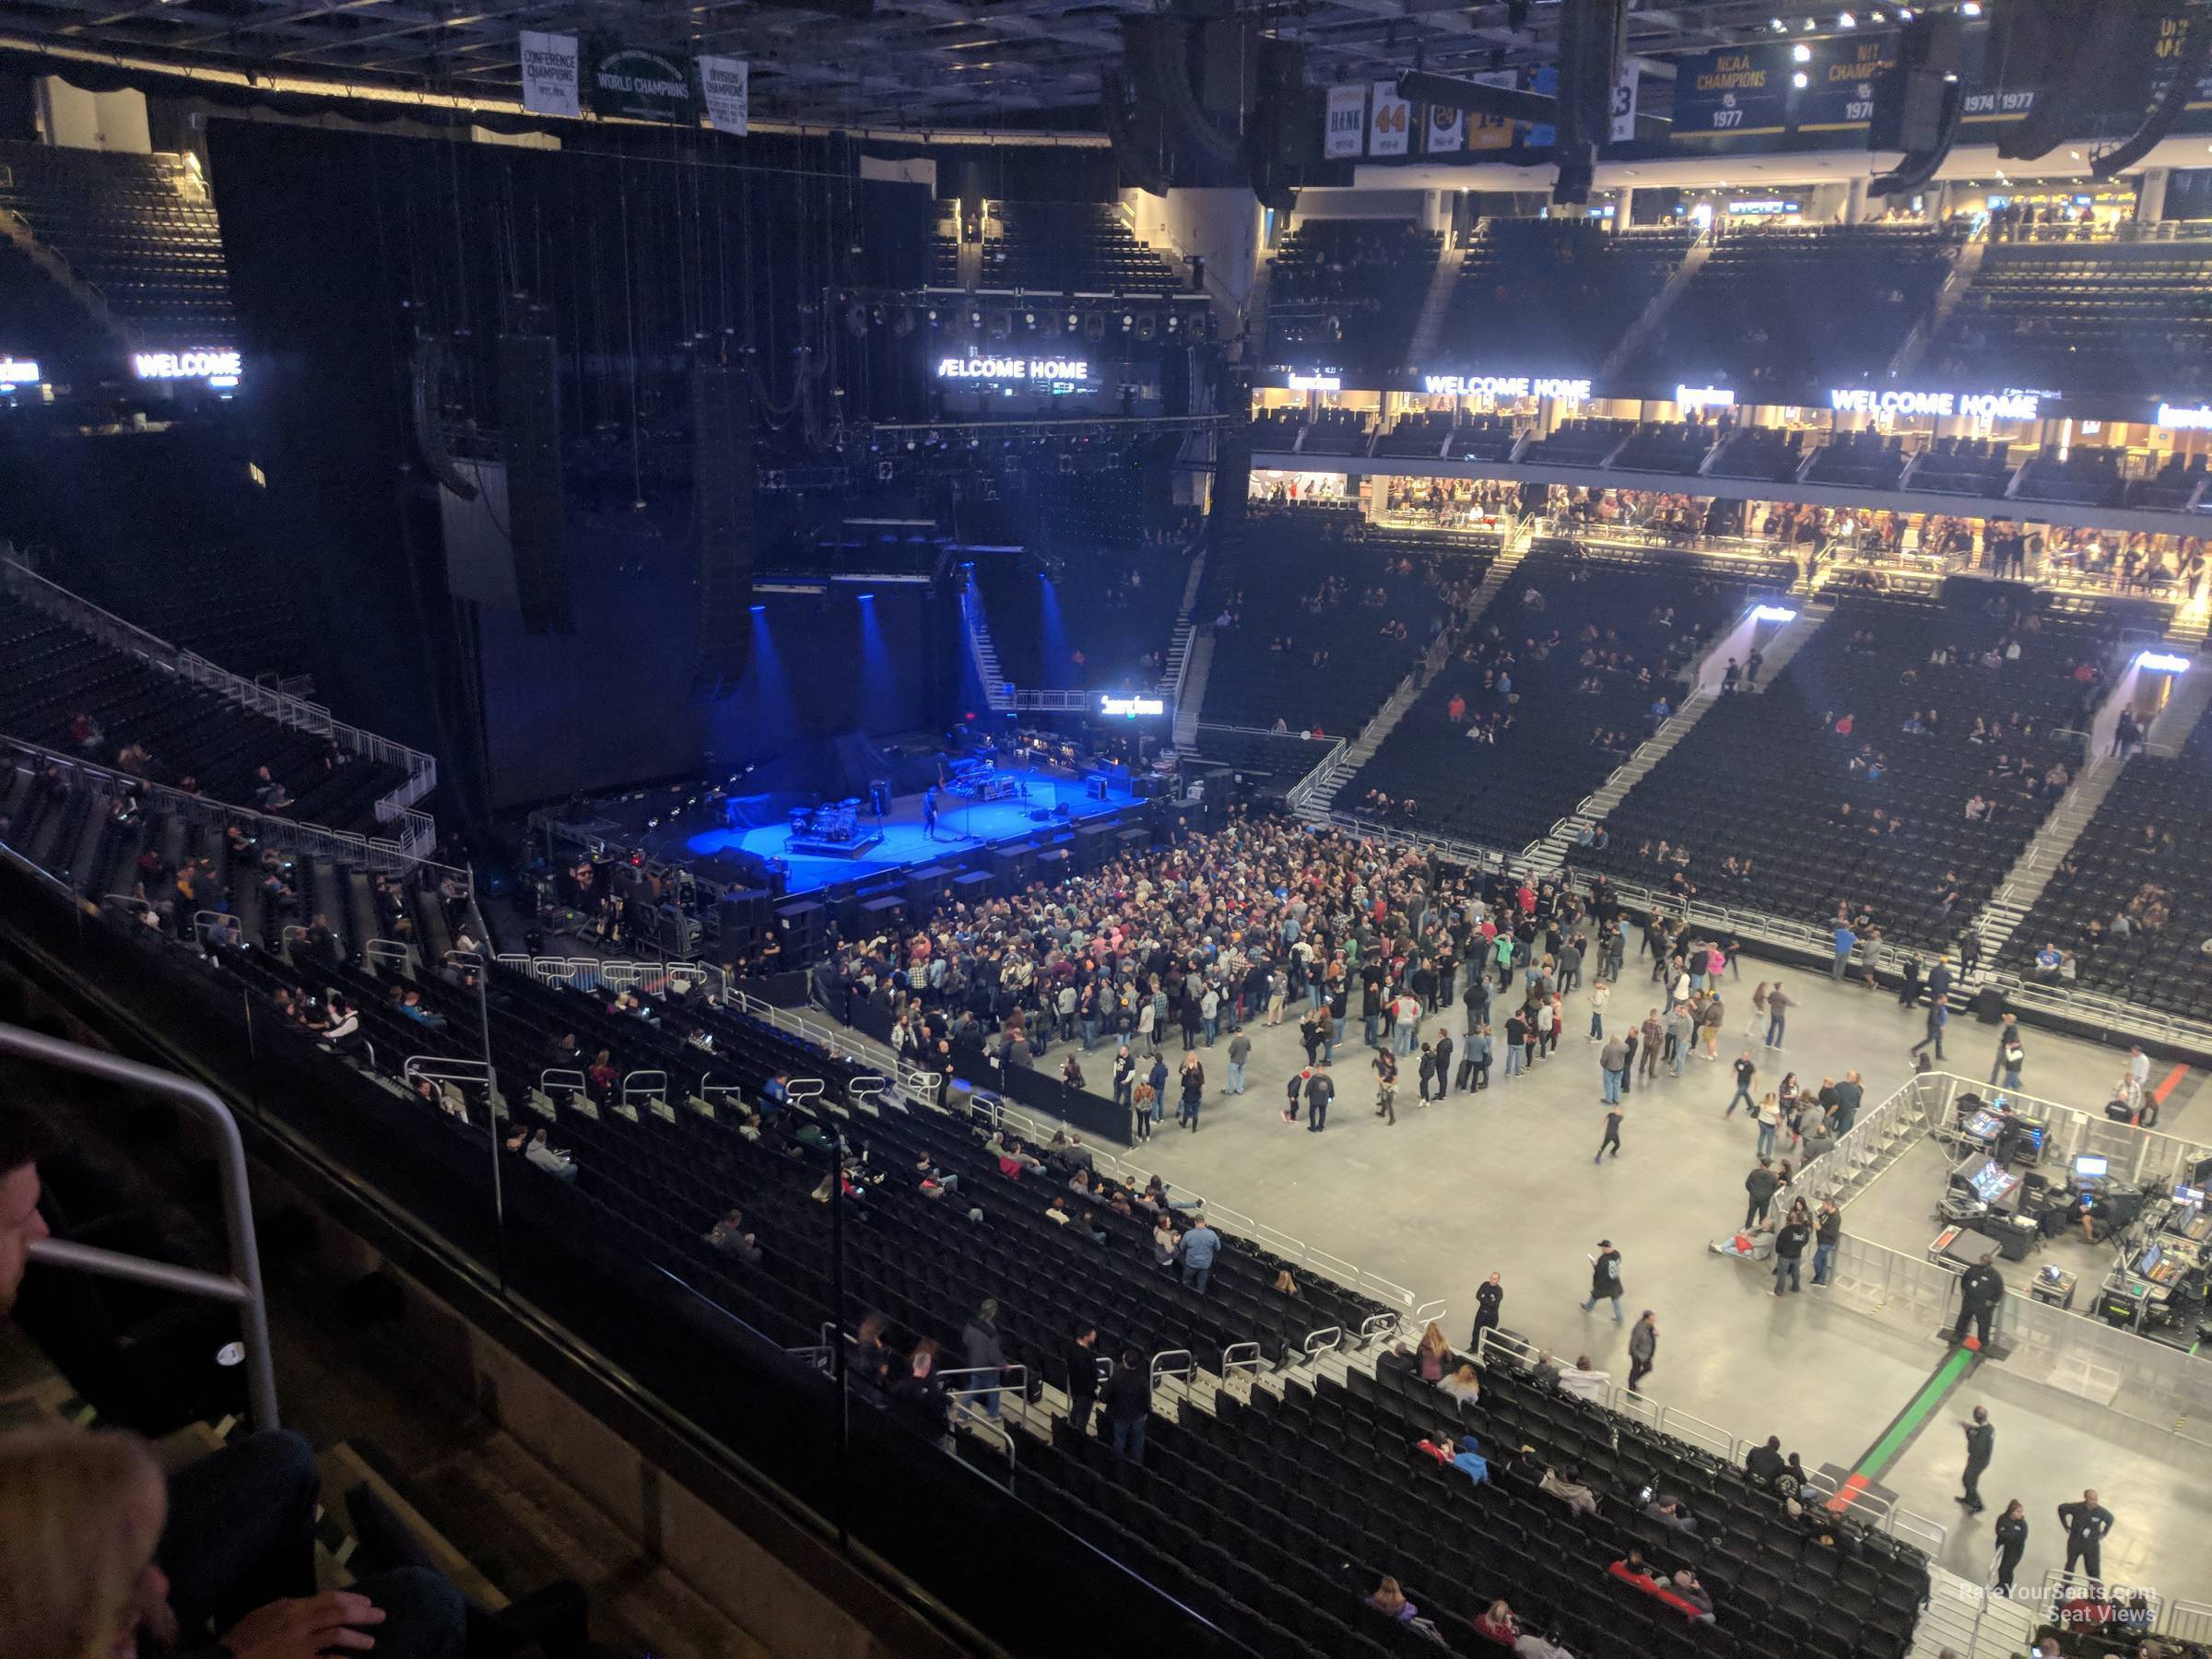 section 206, row 3 seat view  for concert - fiserv forum